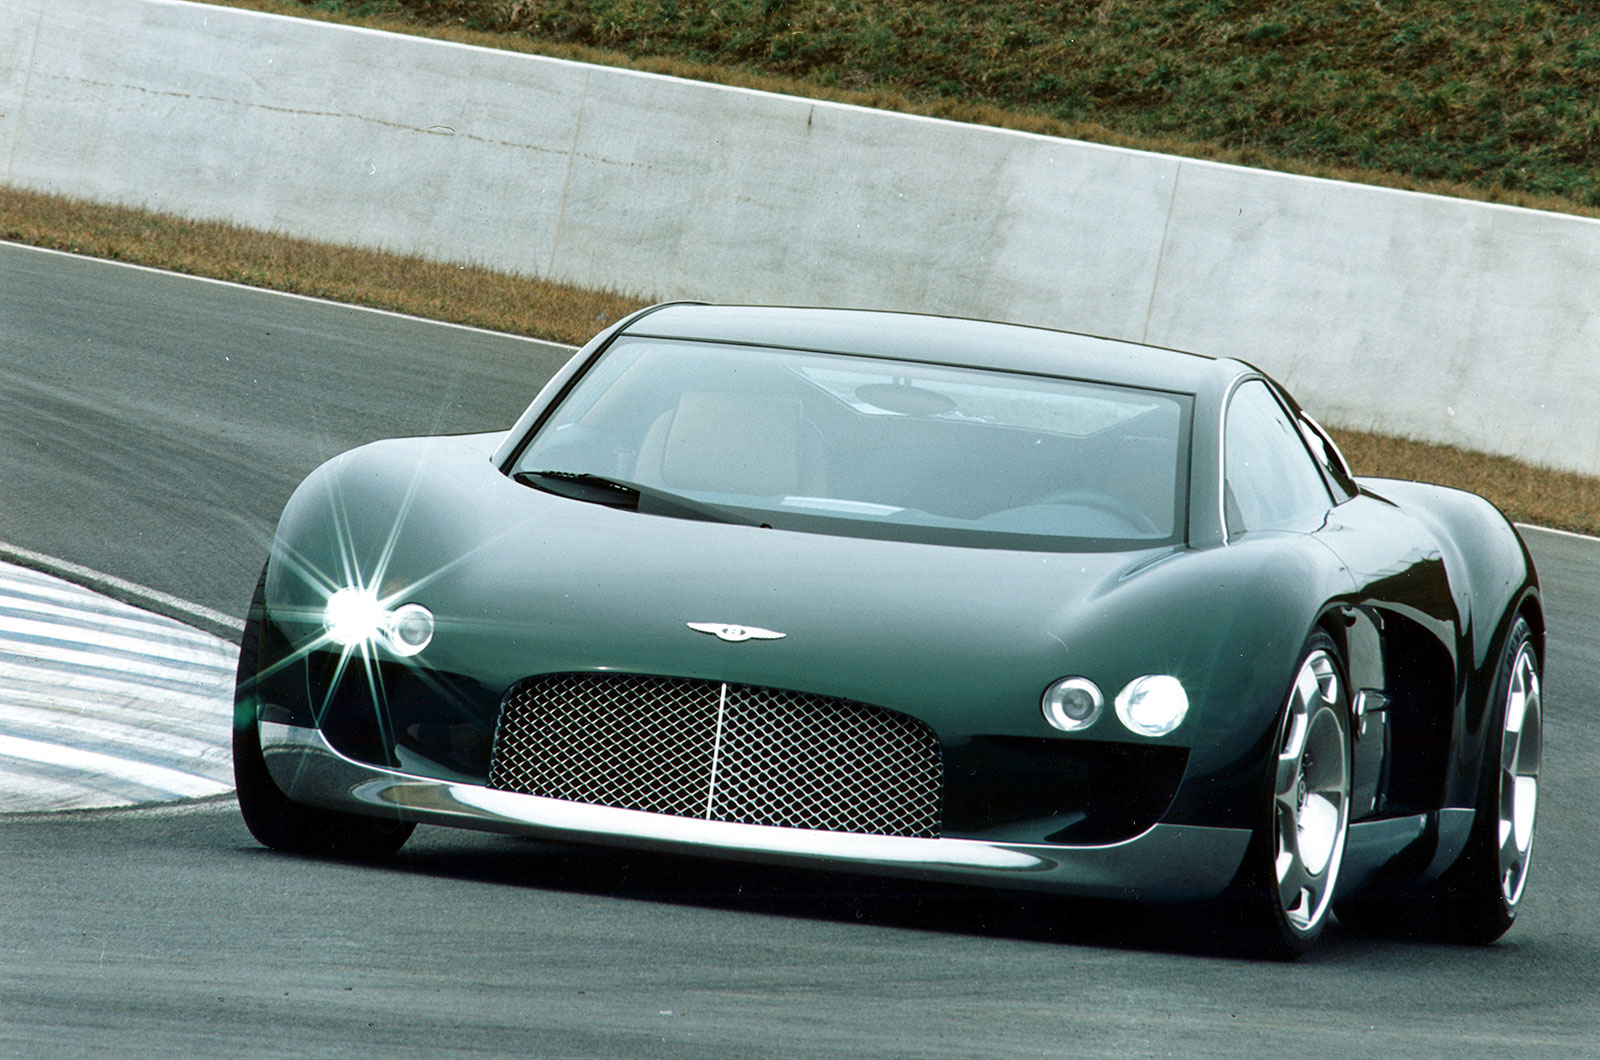 <p>Unveiled at the 1999 Geneva motor show, this was Bentley's first ever mid-engined car. Power came from a <strong>632 HP </strong>naturally aspirated 8.0-liter W16 engine to give a <strong>220mph </strong>top speed. But with Volkswagen already developing the <strong>Bugatti Veyron</strong>, it made no sense to proceed with the Bentley.</p>